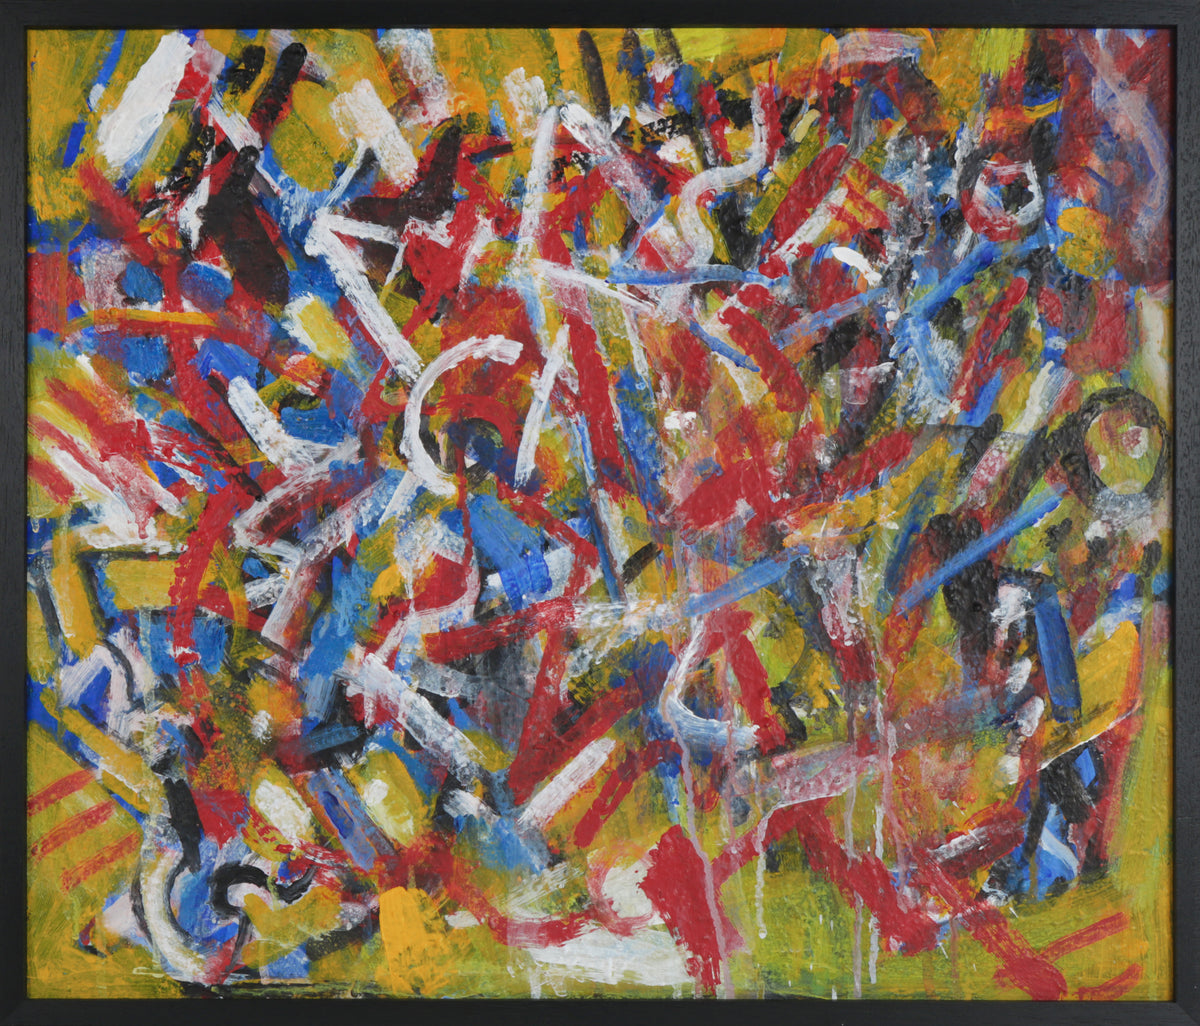 Vivid Abstract Expressionist Painting &lt;br&gt;Early 2000s Oil &lt;br&gt;&lt;br&gt;#B4173